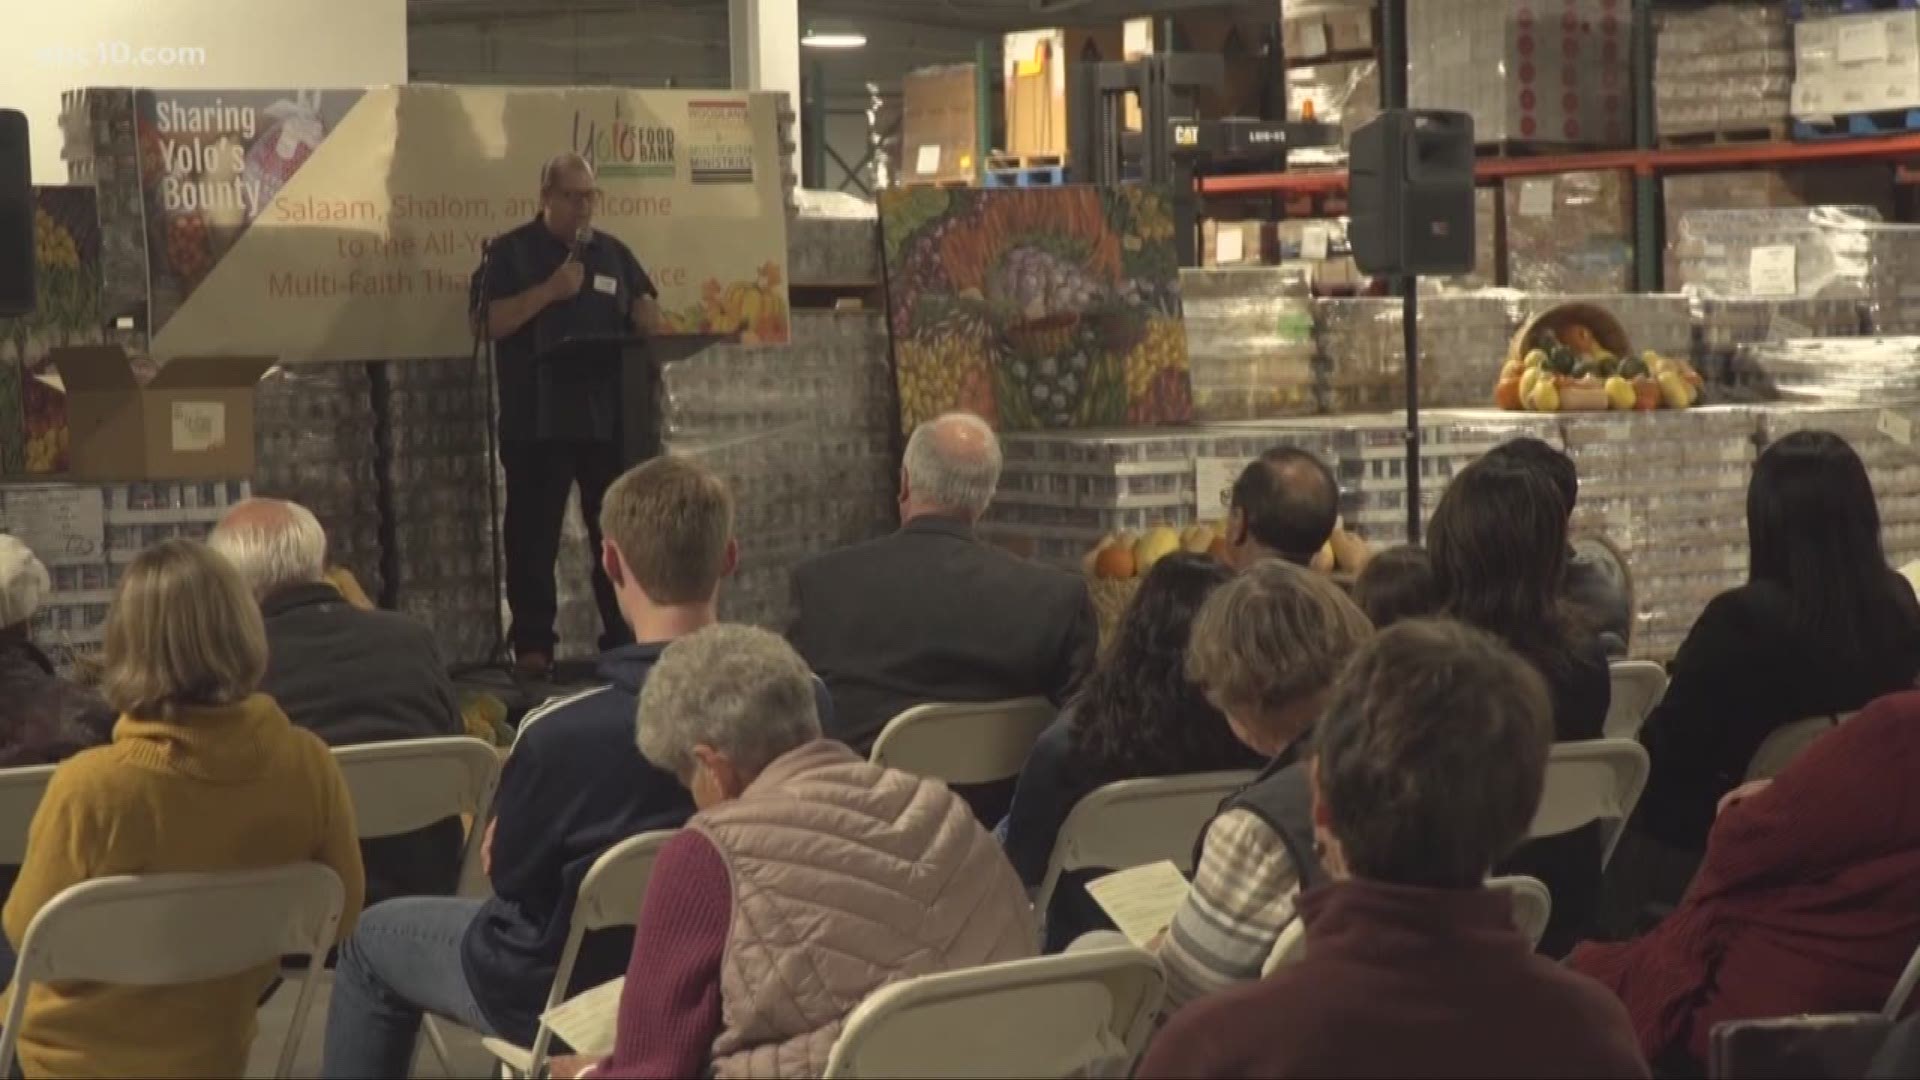 The first ever county wide multi-faith non-denominational service was held at the Yolo Food Bank on Sunday.